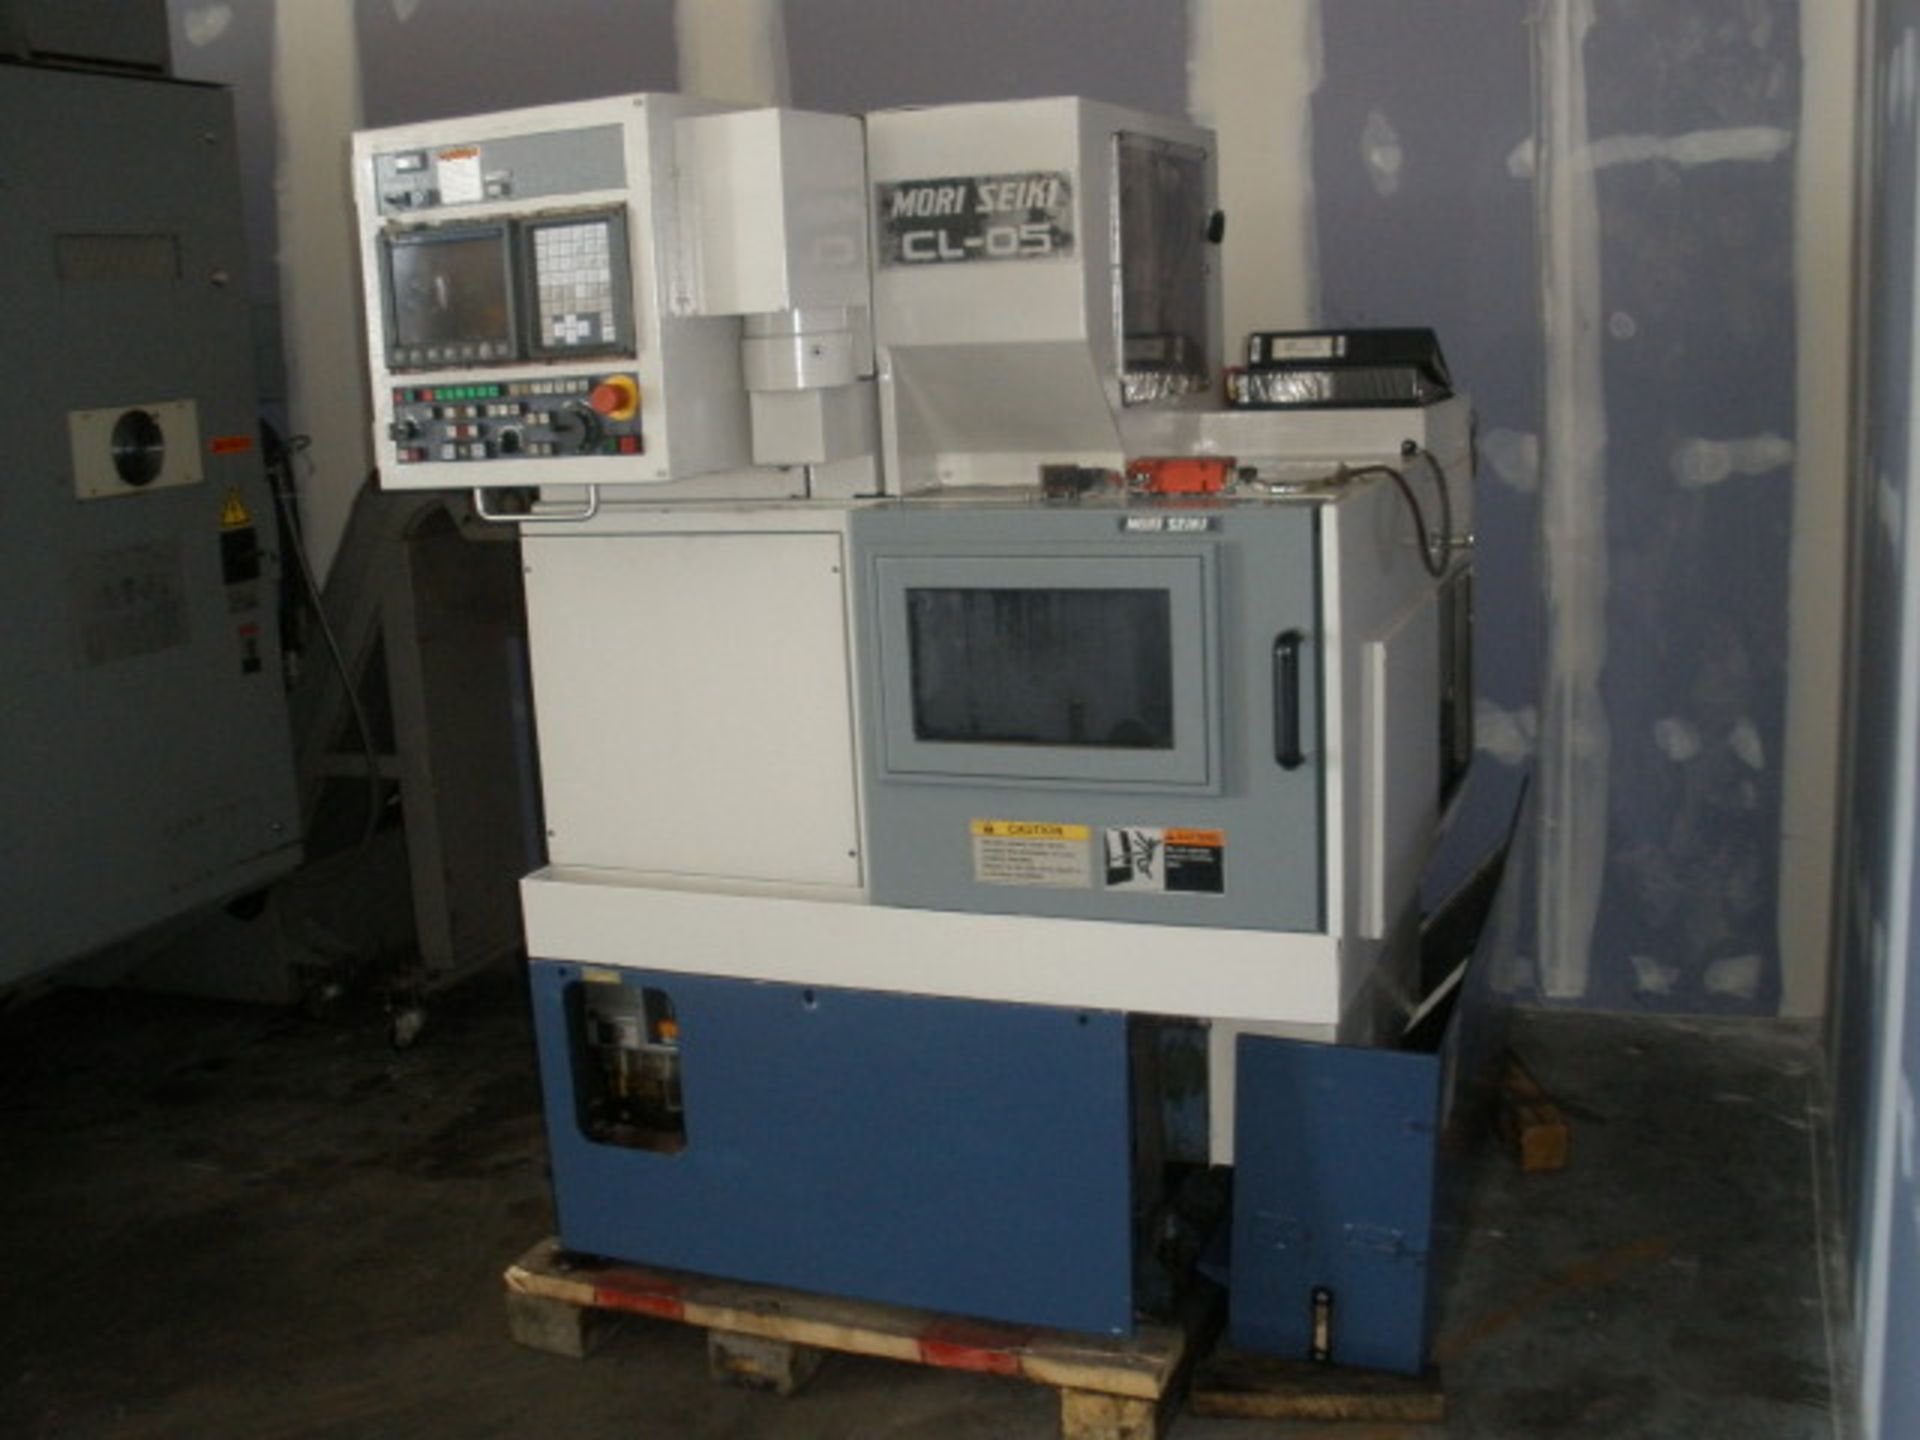 Mori Seiki CL-05 CNC Lathe 1MC 521Control, With Automatic Parts Loader/Unloader. - Image 3 of 8